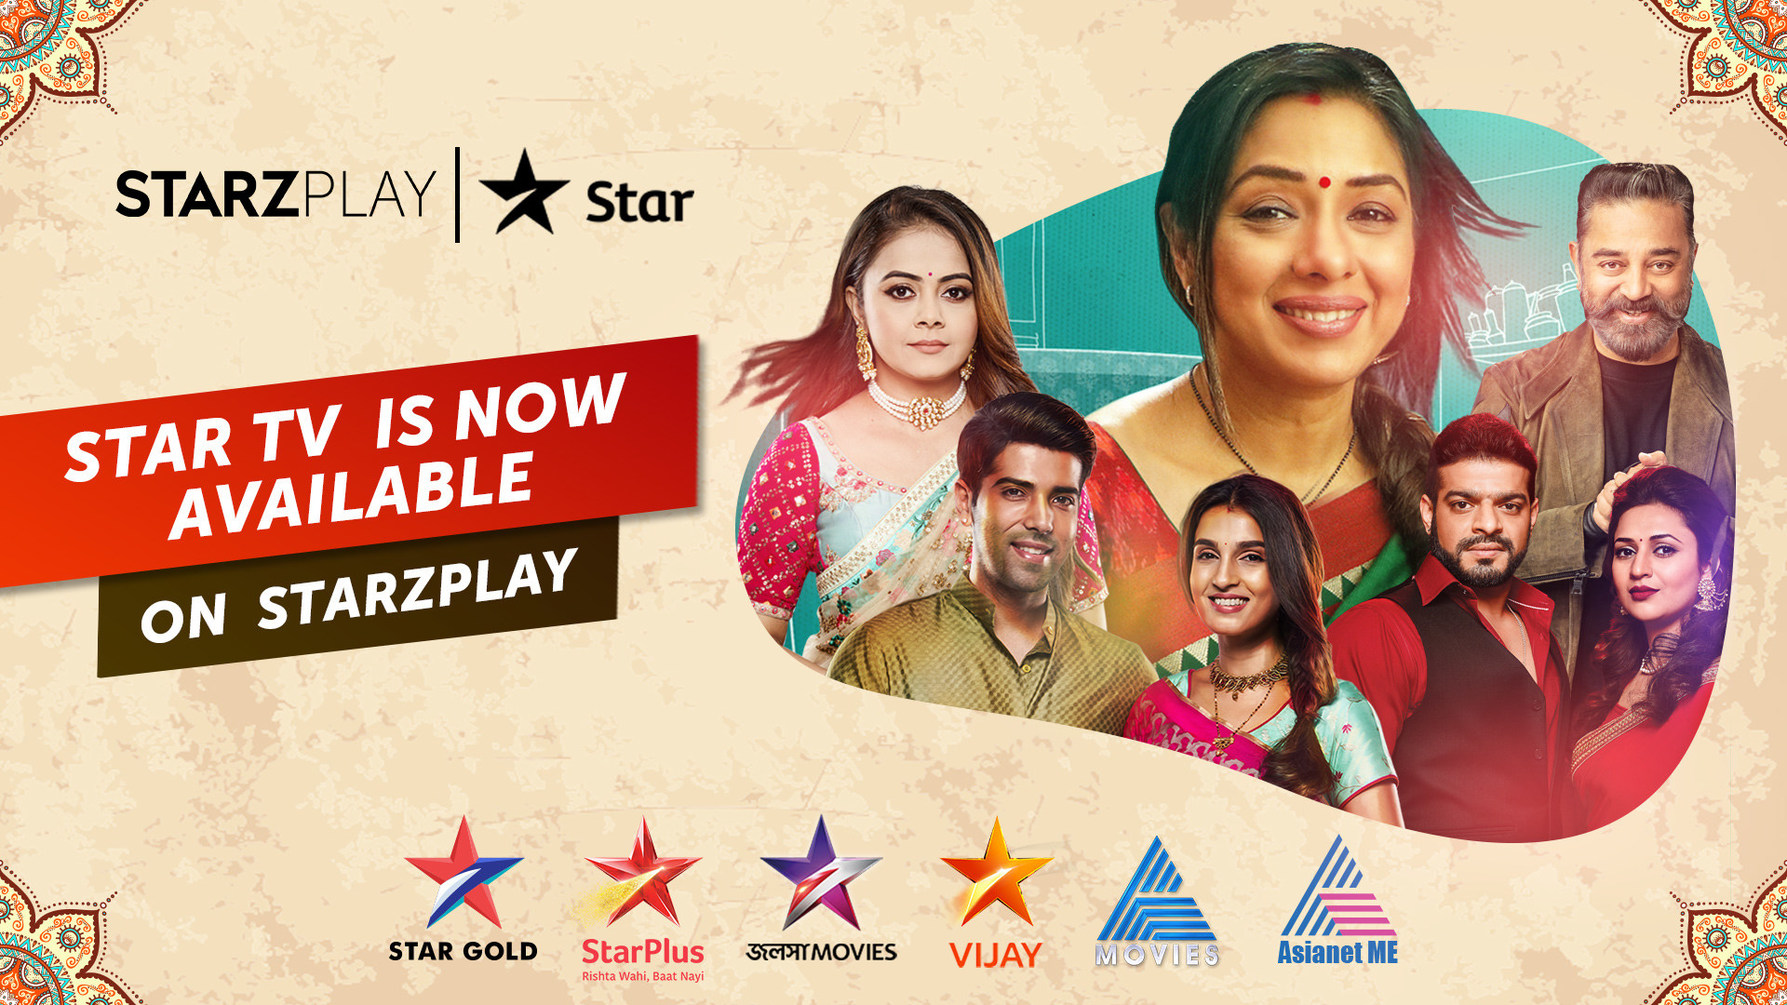 STARZPLAY debuts in the South Asian entertainment segment, inks deal with STAR TV network to feature six Indian entertainment channels